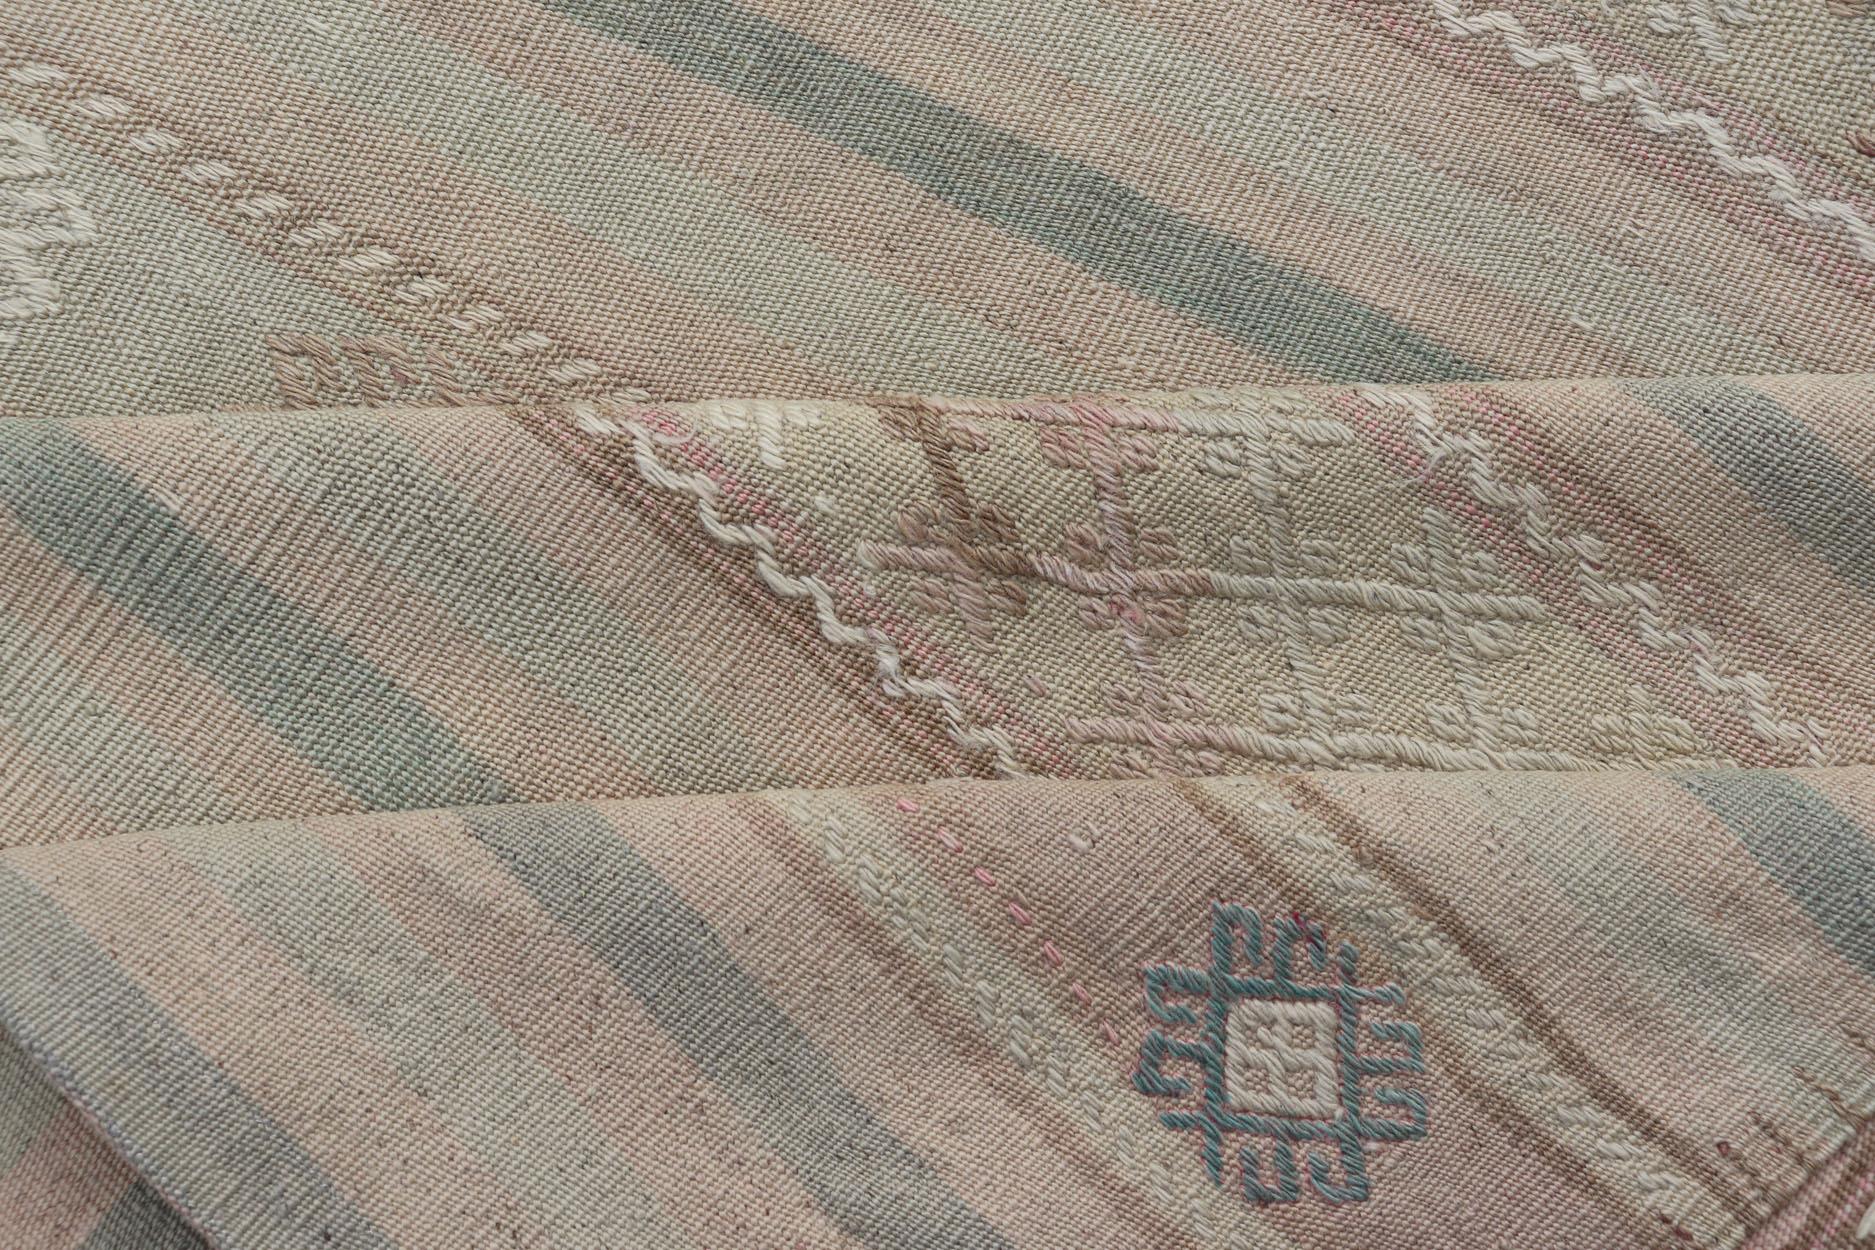 Flat-Weave Turkish Kilim with Embroideries in Earthy Tones and Hints of Pink For Sale 5